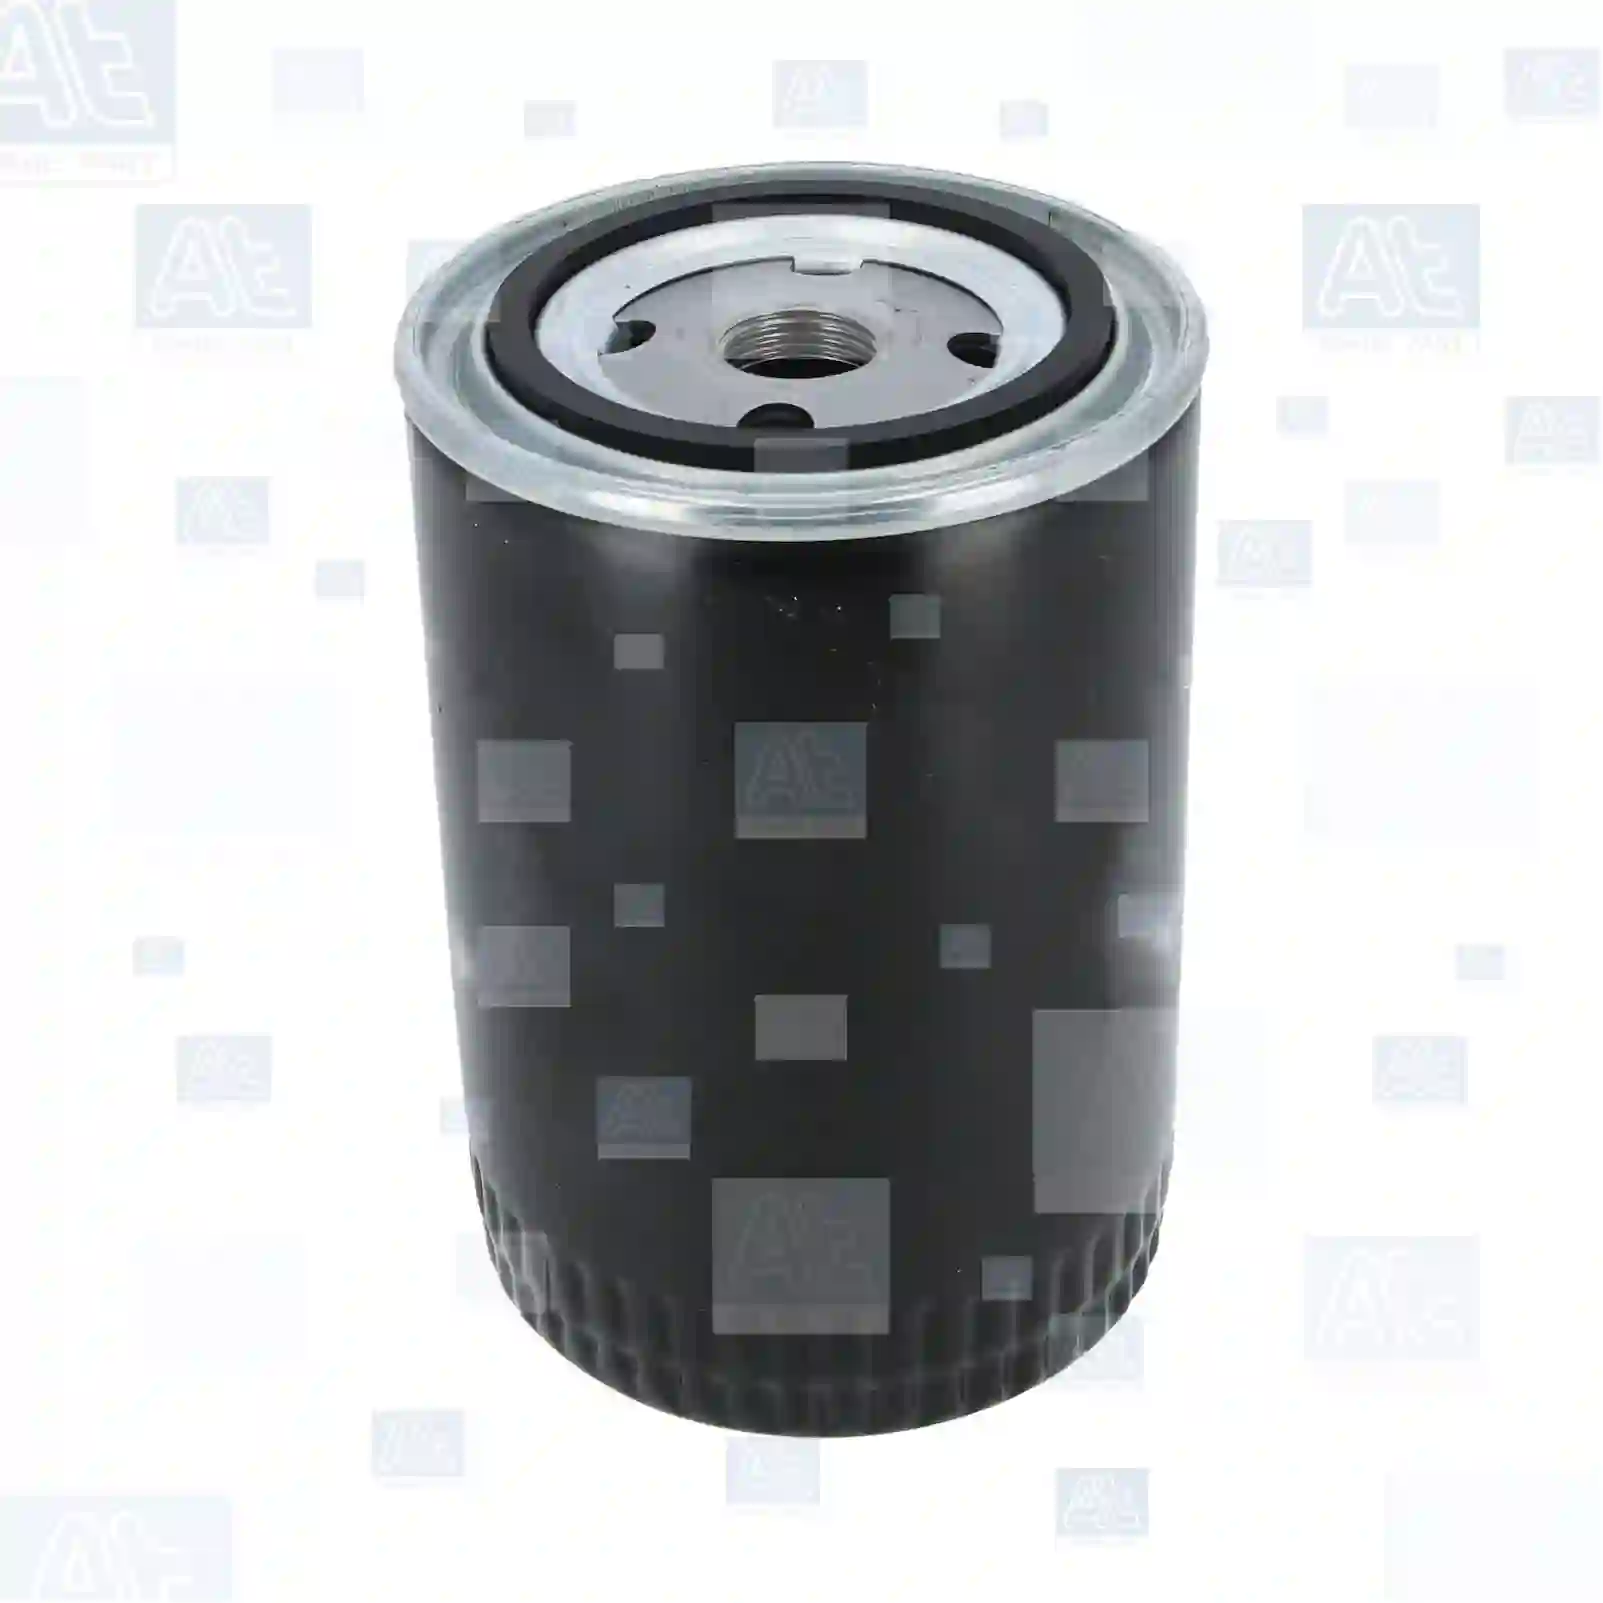 Oil filter, at no 77700604, oem no: 00592602, 105000603000, 37064000, 451700000, 068115561, 068115561B, 068115561C, 7984460, 93156363, 1109A7, 1109F1, 1109G9, 1109K5, 1109V3, 24119014A, 1500932, 1560041010, 42511834, F238202310110, 01354823, 01930328, 01930329, 01930766, 04119015, 05926021, 62703506, 72370000, 1037150, 1318700, 1318701, 1495704, 1498028, 1523494, 1794466, 3917694, 5003232, 5012554, 5012580, 5013148, 9613327, DNP557780, 5574459, 5575840, 5579970, 6435675, 6436749, 6438121, 7984460, 7984655, 7984844, 7984870, 93156304, 93156363, 93156390, 93156952, 9830607, 9975153, 25011243, 7984303, 7984460, 7984844, 93156363, 9975243, 0009830624, 15461-551-305, 15461-551-315, 01164626, 01174416, 244191501, 82220425, 82232108, 82241613, 485GB1138, 0021844001, 15208-43G00, 15208-65001, 15208-65002, 15208-65010, 15208-65011, 15208-65012, 15208-65014, 15208-65016, 15208-65210, 15208-65601, 15208-G4300, 15208-G9903, 15208-V4960, 15208-W1120, 15208-W1123, 15208-W3401, 15208-Y9700, A5208-W3403, 3448991, 3448992, 603362, 603372, 7984229, 7984655, 1109A7, 1109F1, 1109G9, 1109K5, 1109V3, 90110720301, 90110720302, 90110720305, 90110720309, 90110720322, 0000314914, 0005151017, 0024151017, 0770102280, 5000040870, 5000044064, 5000044499, 5000044959, 6005019754, 7701006374, 554329, 555329, A37189, BFF6535, BFF65353, ERC1444, GFE116, 244191300, 244191500, 068115561B, 15208-32225, 15208-32255, 15208-7F400, 15600-40010, 15600-41020, 15600-44010, 15600-50010, 15601-30010, 15601-41010, 15601-42020, 15601-44011, 16500-41020, 120190212001, 15205W1120, 1520805001, 1520805D00, 1520805D01, 1520843G00, 1520843G0A, 1520865000, 1520865004, 1520865005, 1520865011, 1520865012, 1520865014, 1520865016, 152087F400, 152087T400, 15208W1115, 15208W1120, 15208W1120B, 15208W1123, 15208W3403, 92287Q7332, BF20805D02, FL20805D01, 1257492, 12574927, 1328126, 13281611, 4804651, 4840740, 705097, 008115561, 028115561B, 028115561E, 068115561, 068115561A, 068115561B, 068115561C, 068115561E, 068115561G, 068115568B, 078115561E, 168115561A, 681155613 At Spare Part | Engine, Accelerator Pedal, Camshaft, Connecting Rod, Crankcase, Crankshaft, Cylinder Head, Engine Suspension Mountings, Exhaust Manifold, Exhaust Gas Recirculation, Filter Kits, Flywheel Housing, General Overhaul Kits, Engine, Intake Manifold, Oil Cleaner, Oil Cooler, Oil Filter, Oil Pump, Oil Sump, Piston & Liner, Sensor & Switch, Timing Case, Turbocharger, Cooling System, Belt Tensioner, Coolant Filter, Coolant Pipe, Corrosion Prevention Agent, Drive, Expansion Tank, Fan, Intercooler, Monitors & Gauges, Radiator, Thermostat, V-Belt / Timing belt, Water Pump, Fuel System, Electronical Injector Unit, Feed Pump, Fuel Filter, cpl., Fuel Gauge Sender,  Fuel Line, Fuel Pump, Fuel Tank, Injection Line Kit, Injection Pump, Exhaust System, Clutch & Pedal, Gearbox, Propeller Shaft, Axles, Brake System, Hubs & Wheels, Suspension, Leaf Spring, Universal Parts / Accessories, Steering, Electrical System, Cabin Oil filter, at no 77700604, oem no: 00592602, 105000603000, 37064000, 451700000, 068115561, 068115561B, 068115561C, 7984460, 93156363, 1109A7, 1109F1, 1109G9, 1109K5, 1109V3, 24119014A, 1500932, 1560041010, 42511834, F238202310110, 01354823, 01930328, 01930329, 01930766, 04119015, 05926021, 62703506, 72370000, 1037150, 1318700, 1318701, 1495704, 1498028, 1523494, 1794466, 3917694, 5003232, 5012554, 5012580, 5013148, 9613327, DNP557780, 5574459, 5575840, 5579970, 6435675, 6436749, 6438121, 7984460, 7984655, 7984844, 7984870, 93156304, 93156363, 93156390, 93156952, 9830607, 9975153, 25011243, 7984303, 7984460, 7984844, 93156363, 9975243, 0009830624, 15461-551-305, 15461-551-315, 01164626, 01174416, 244191501, 82220425, 82232108, 82241613, 485GB1138, 0021844001, 15208-43G00, 15208-65001, 15208-65002, 15208-65010, 15208-65011, 15208-65012, 15208-65014, 15208-65016, 15208-65210, 15208-65601, 15208-G4300, 15208-G9903, 15208-V4960, 15208-W1120, 15208-W1123, 15208-W3401, 15208-Y9700, A5208-W3403, 3448991, 3448992, 603362, 603372, 7984229, 7984655, 1109A7, 1109F1, 1109G9, 1109K5, 1109V3, 90110720301, 90110720302, 90110720305, 90110720309, 90110720322, 0000314914, 0005151017, 0024151017, 0770102280, 5000040870, 5000044064, 5000044499, 5000044959, 6005019754, 7701006374, 554329, 555329, A37189, BFF6535, BFF65353, ERC1444, GFE116, 244191300, 244191500, 068115561B, 15208-32225, 15208-32255, 15208-7F400, 15600-40010, 15600-41020, 15600-44010, 15600-50010, 15601-30010, 15601-41010, 15601-42020, 15601-44011, 16500-41020, 120190212001, 15205W1120, 1520805001, 1520805D00, 1520805D01, 1520843G00, 1520843G0A, 1520865000, 1520865004, 1520865005, 1520865011, 1520865012, 1520865014, 1520865016, 152087F400, 152087T400, 15208W1115, 15208W1120, 15208W1120B, 15208W1123, 15208W3403, 92287Q7332, BF20805D02, FL20805D01, 1257492, 12574927, 1328126, 13281611, 4804651, 4840740, 705097, 008115561, 028115561B, 028115561E, 068115561, 068115561A, 068115561B, 068115561C, 068115561E, 068115561G, 068115568B, 078115561E, 168115561A, 681155613 At Spare Part | Engine, Accelerator Pedal, Camshaft, Connecting Rod, Crankcase, Crankshaft, Cylinder Head, Engine Suspension Mountings, Exhaust Manifold, Exhaust Gas Recirculation, Filter Kits, Flywheel Housing, General Overhaul Kits, Engine, Intake Manifold, Oil Cleaner, Oil Cooler, Oil Filter, Oil Pump, Oil Sump, Piston & Liner, Sensor & Switch, Timing Case, Turbocharger, Cooling System, Belt Tensioner, Coolant Filter, Coolant Pipe, Corrosion Prevention Agent, Drive, Expansion Tank, Fan, Intercooler, Monitors & Gauges, Radiator, Thermostat, V-Belt / Timing belt, Water Pump, Fuel System, Electronical Injector Unit, Feed Pump, Fuel Filter, cpl., Fuel Gauge Sender,  Fuel Line, Fuel Pump, Fuel Tank, Injection Line Kit, Injection Pump, Exhaust System, Clutch & Pedal, Gearbox, Propeller Shaft, Axles, Brake System, Hubs & Wheels, Suspension, Leaf Spring, Universal Parts / Accessories, Steering, Electrical System, Cabin